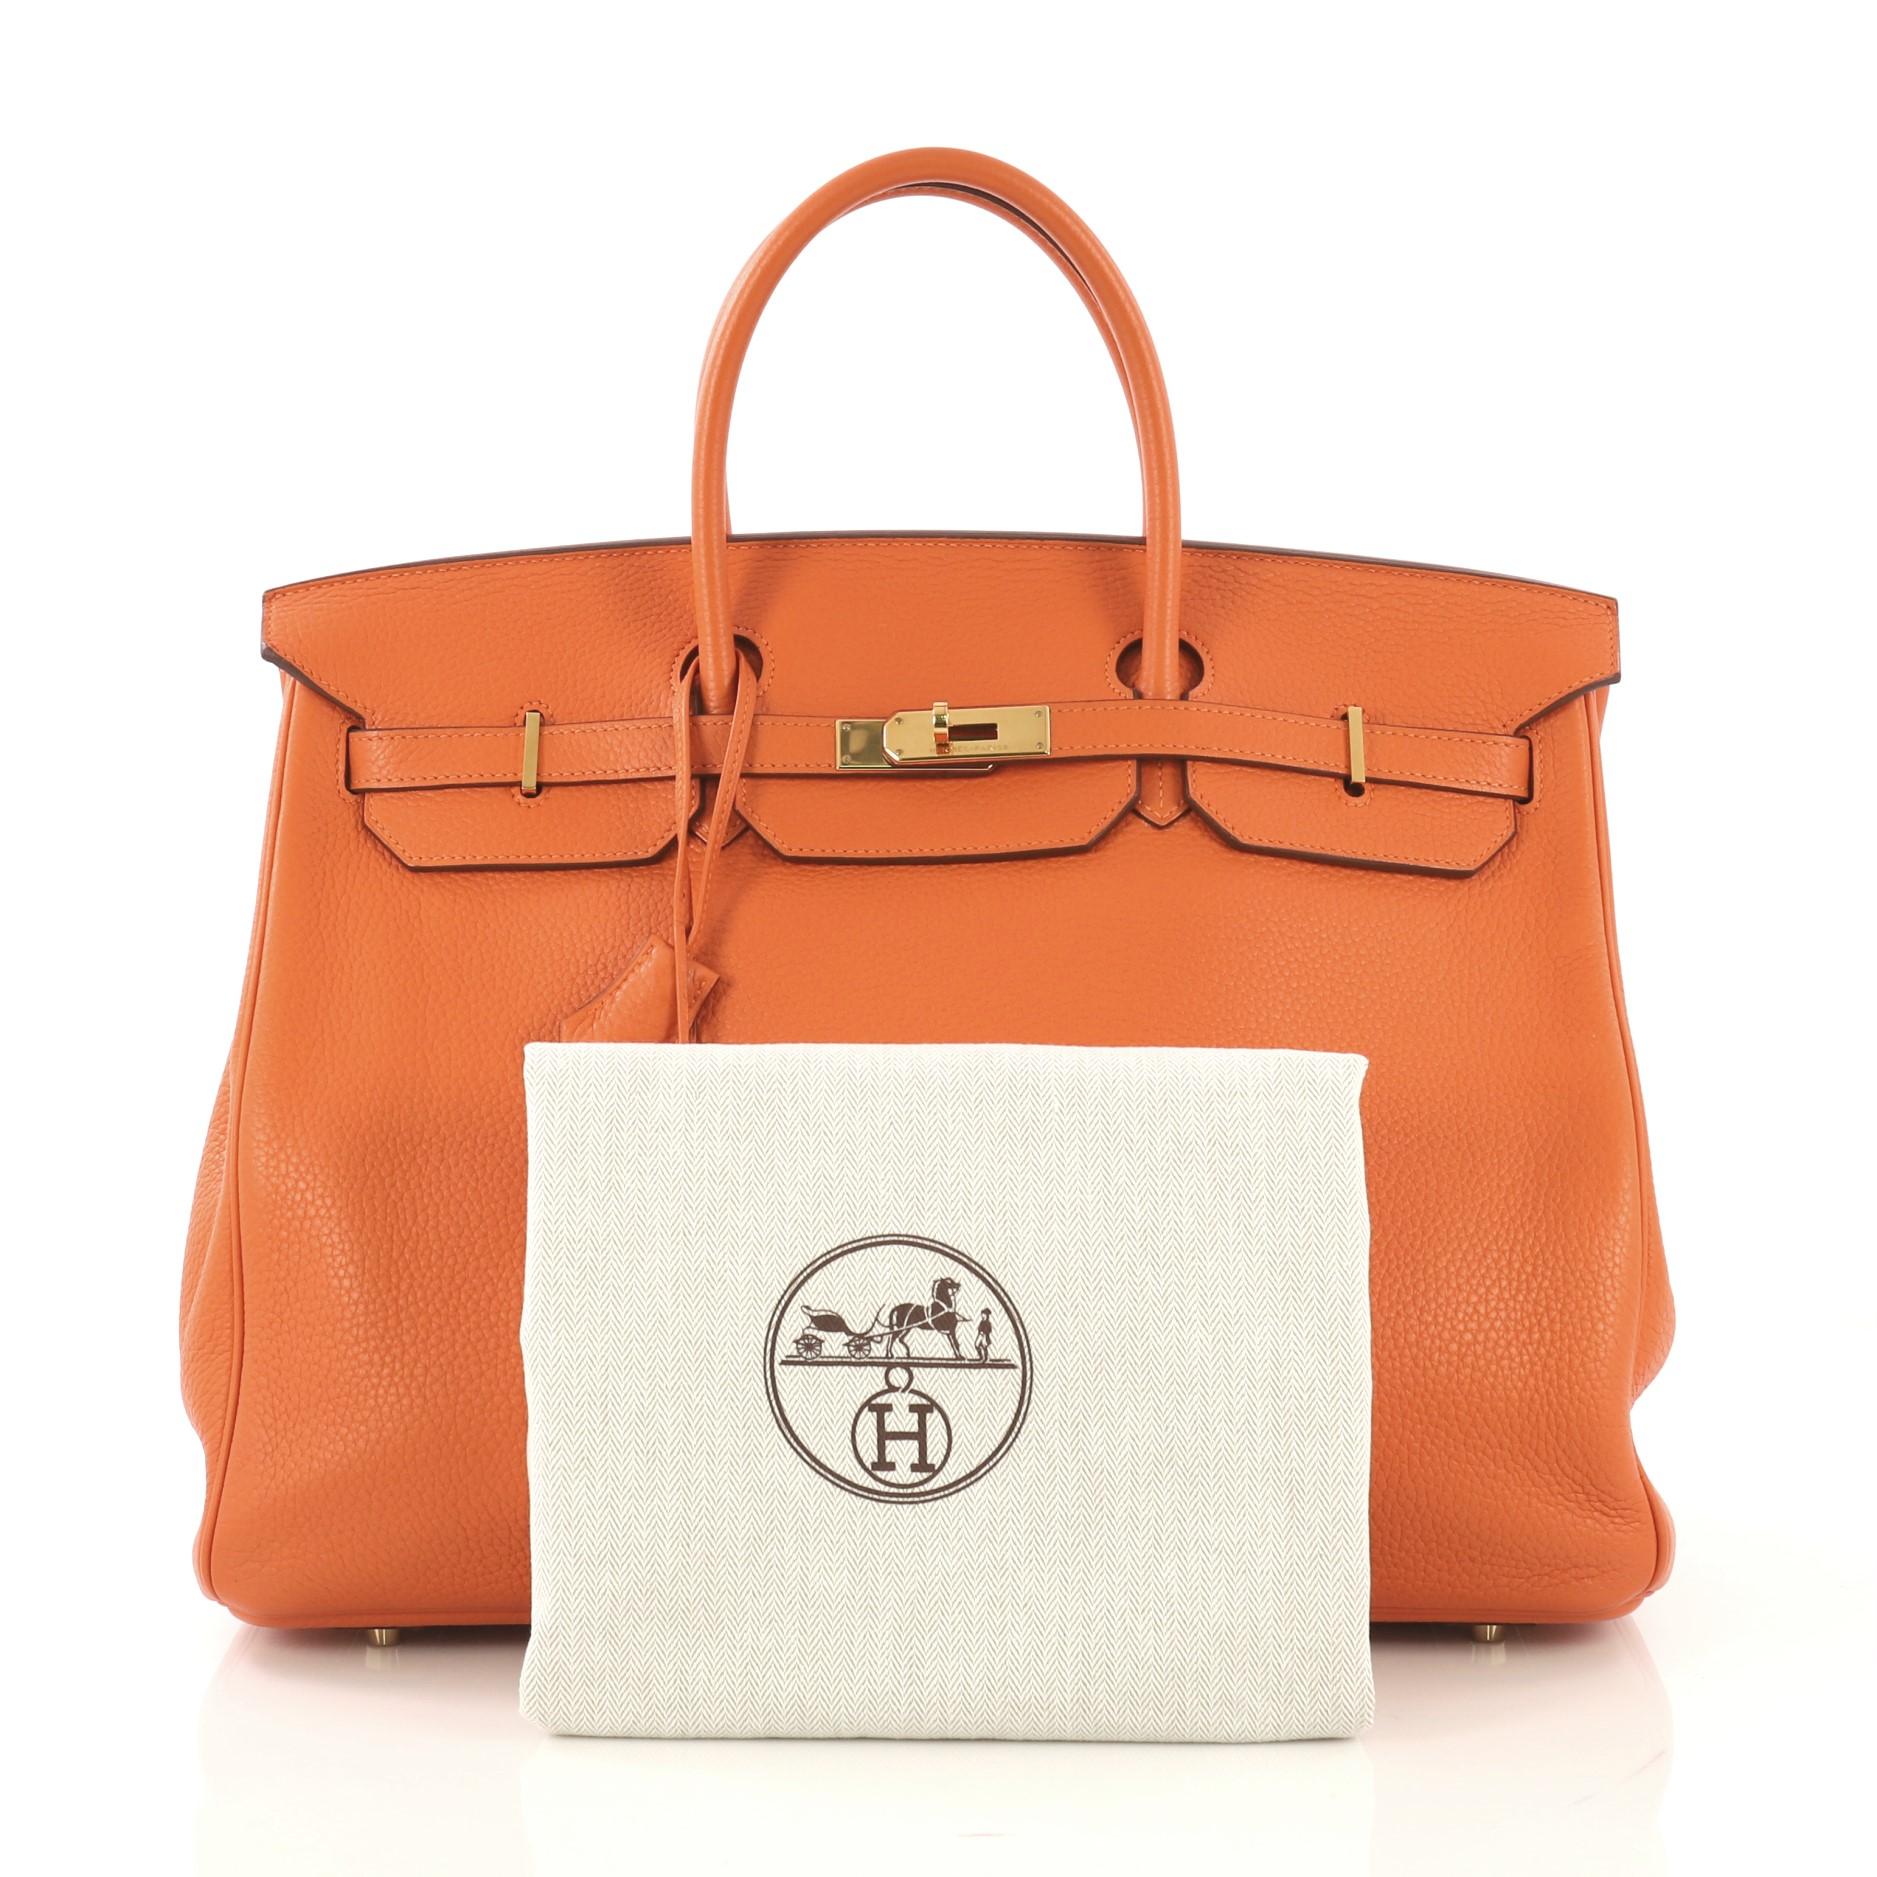  This Hermes Birkin Handbag Orange H Clemence with Gold Hardware 40, crafted in Orange H orange clemence leather, features dual rolled handles, frontal flap, and gold hardware. Its turn-lock closure opens to an Orange H orange clemence leather